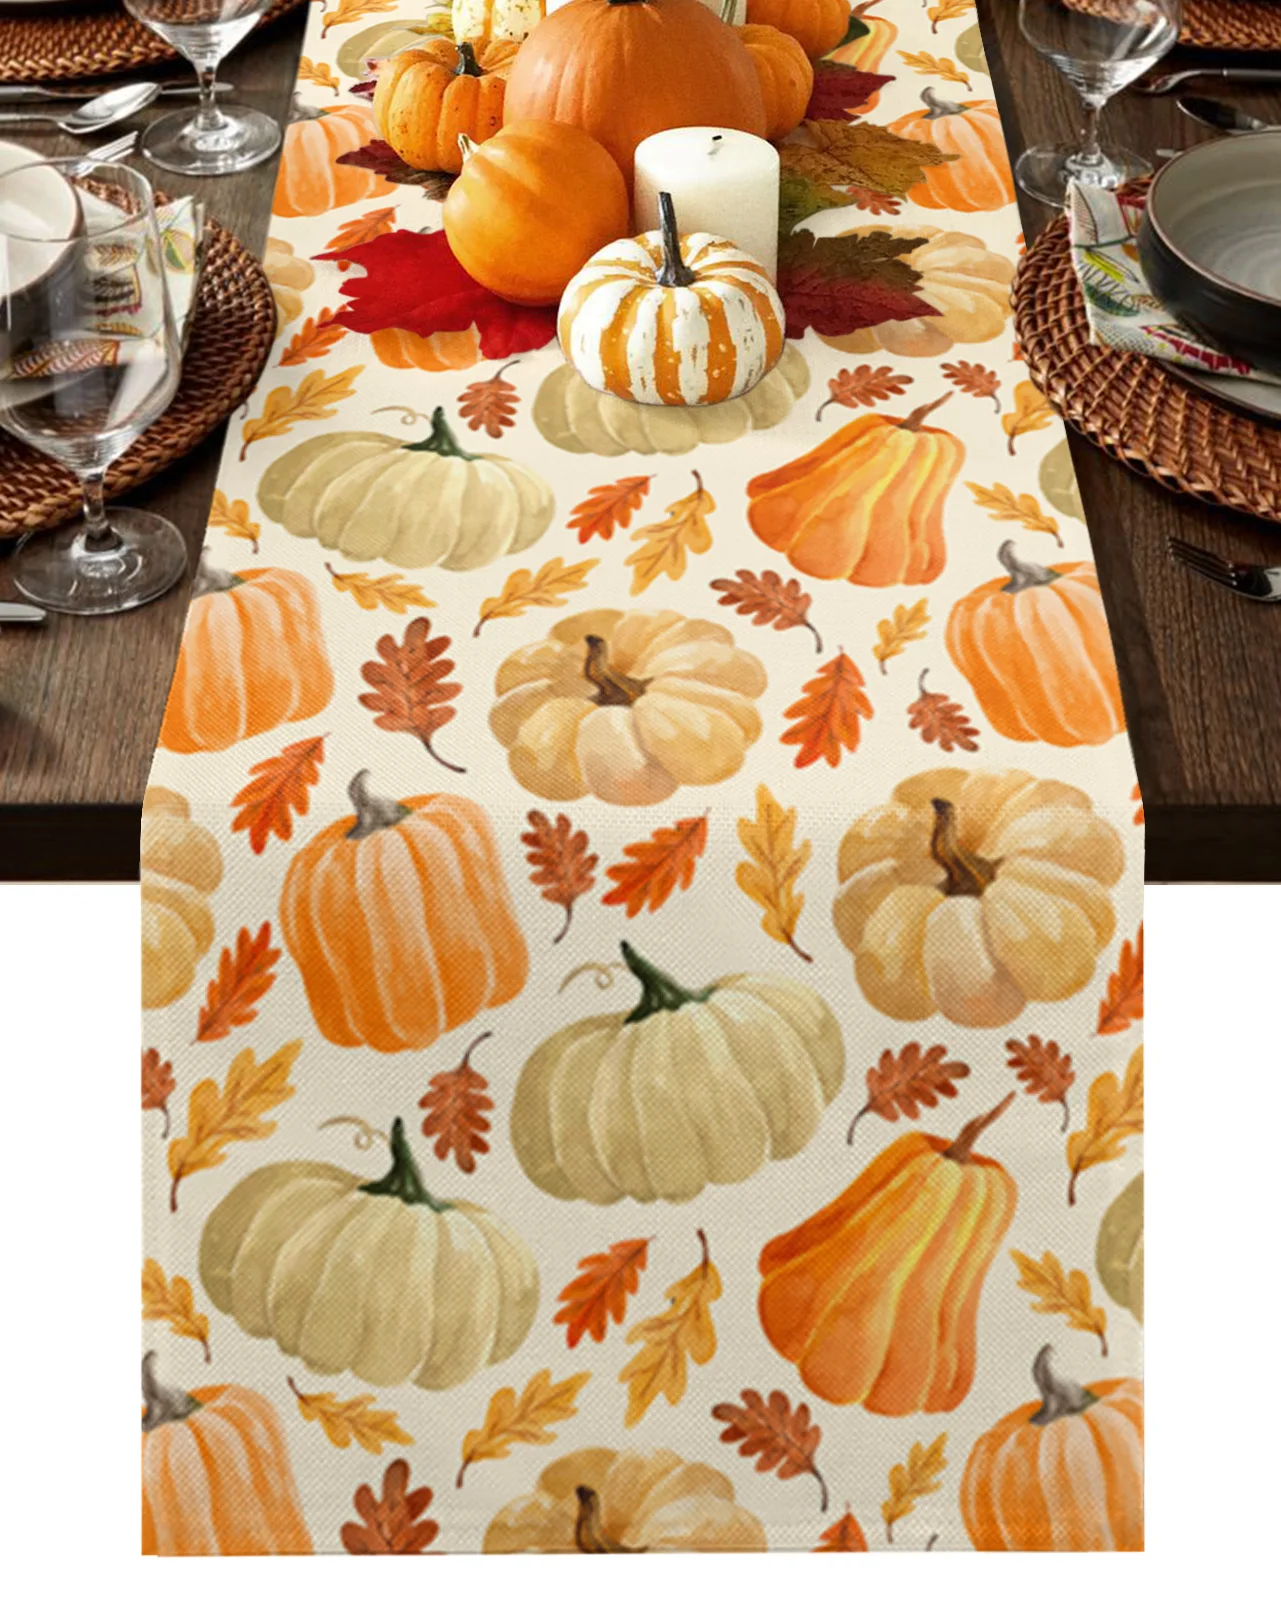 

Autumn Pumpkin Maple Leaf Table Runner Kitchen Dining Table Decor Tablecloth Wedding Holiday Decor Table Runner